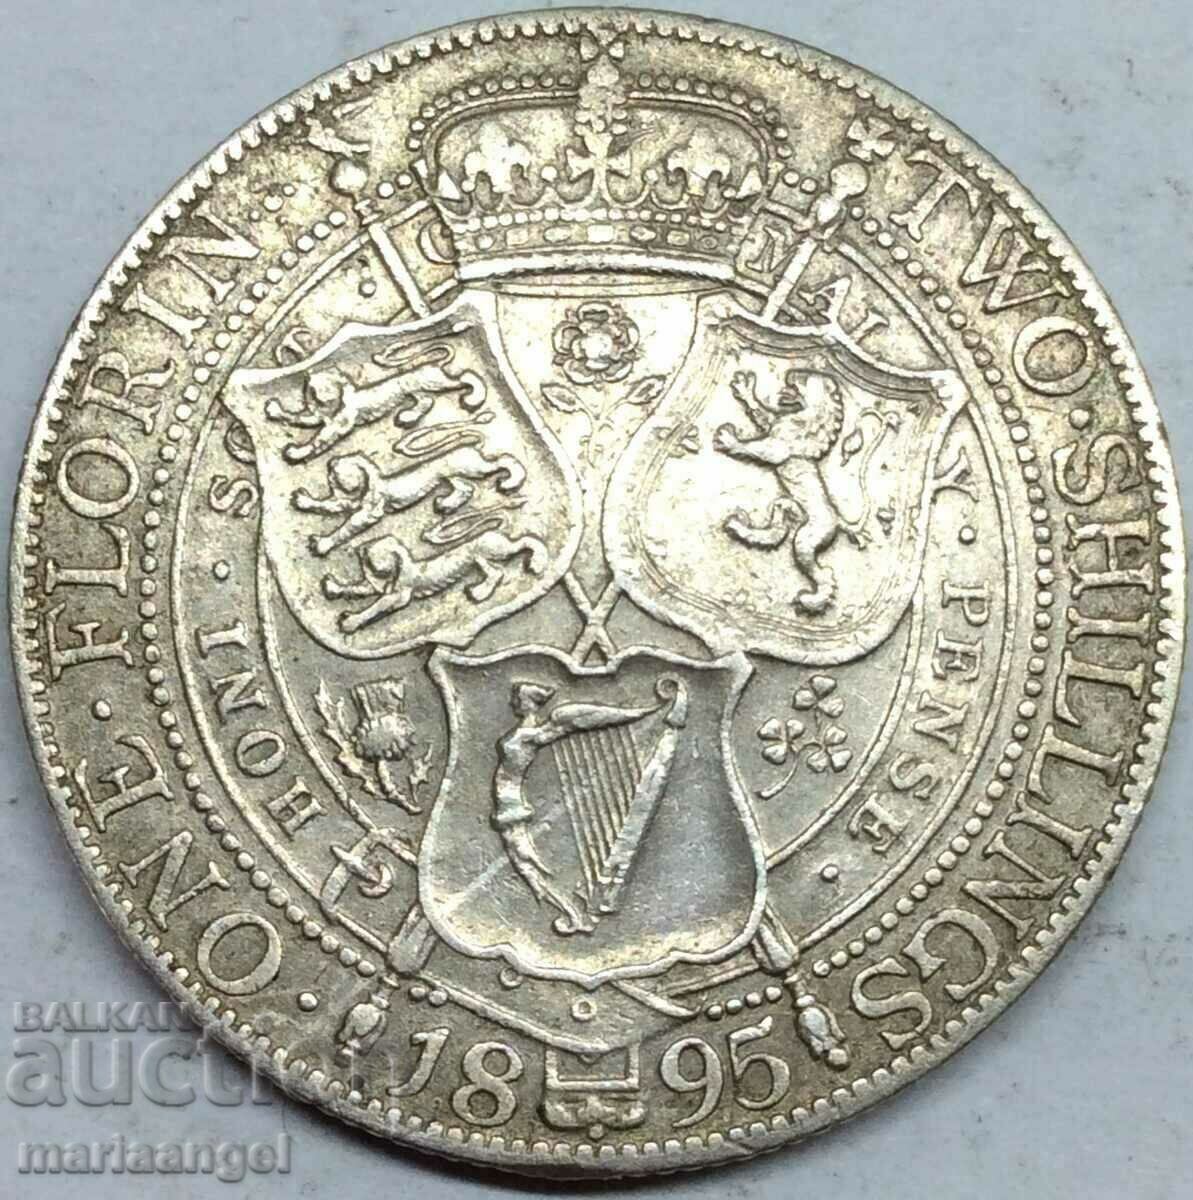 Great Britain 1 Florin 2 Shillings 1895 28mm 11.26g Silver